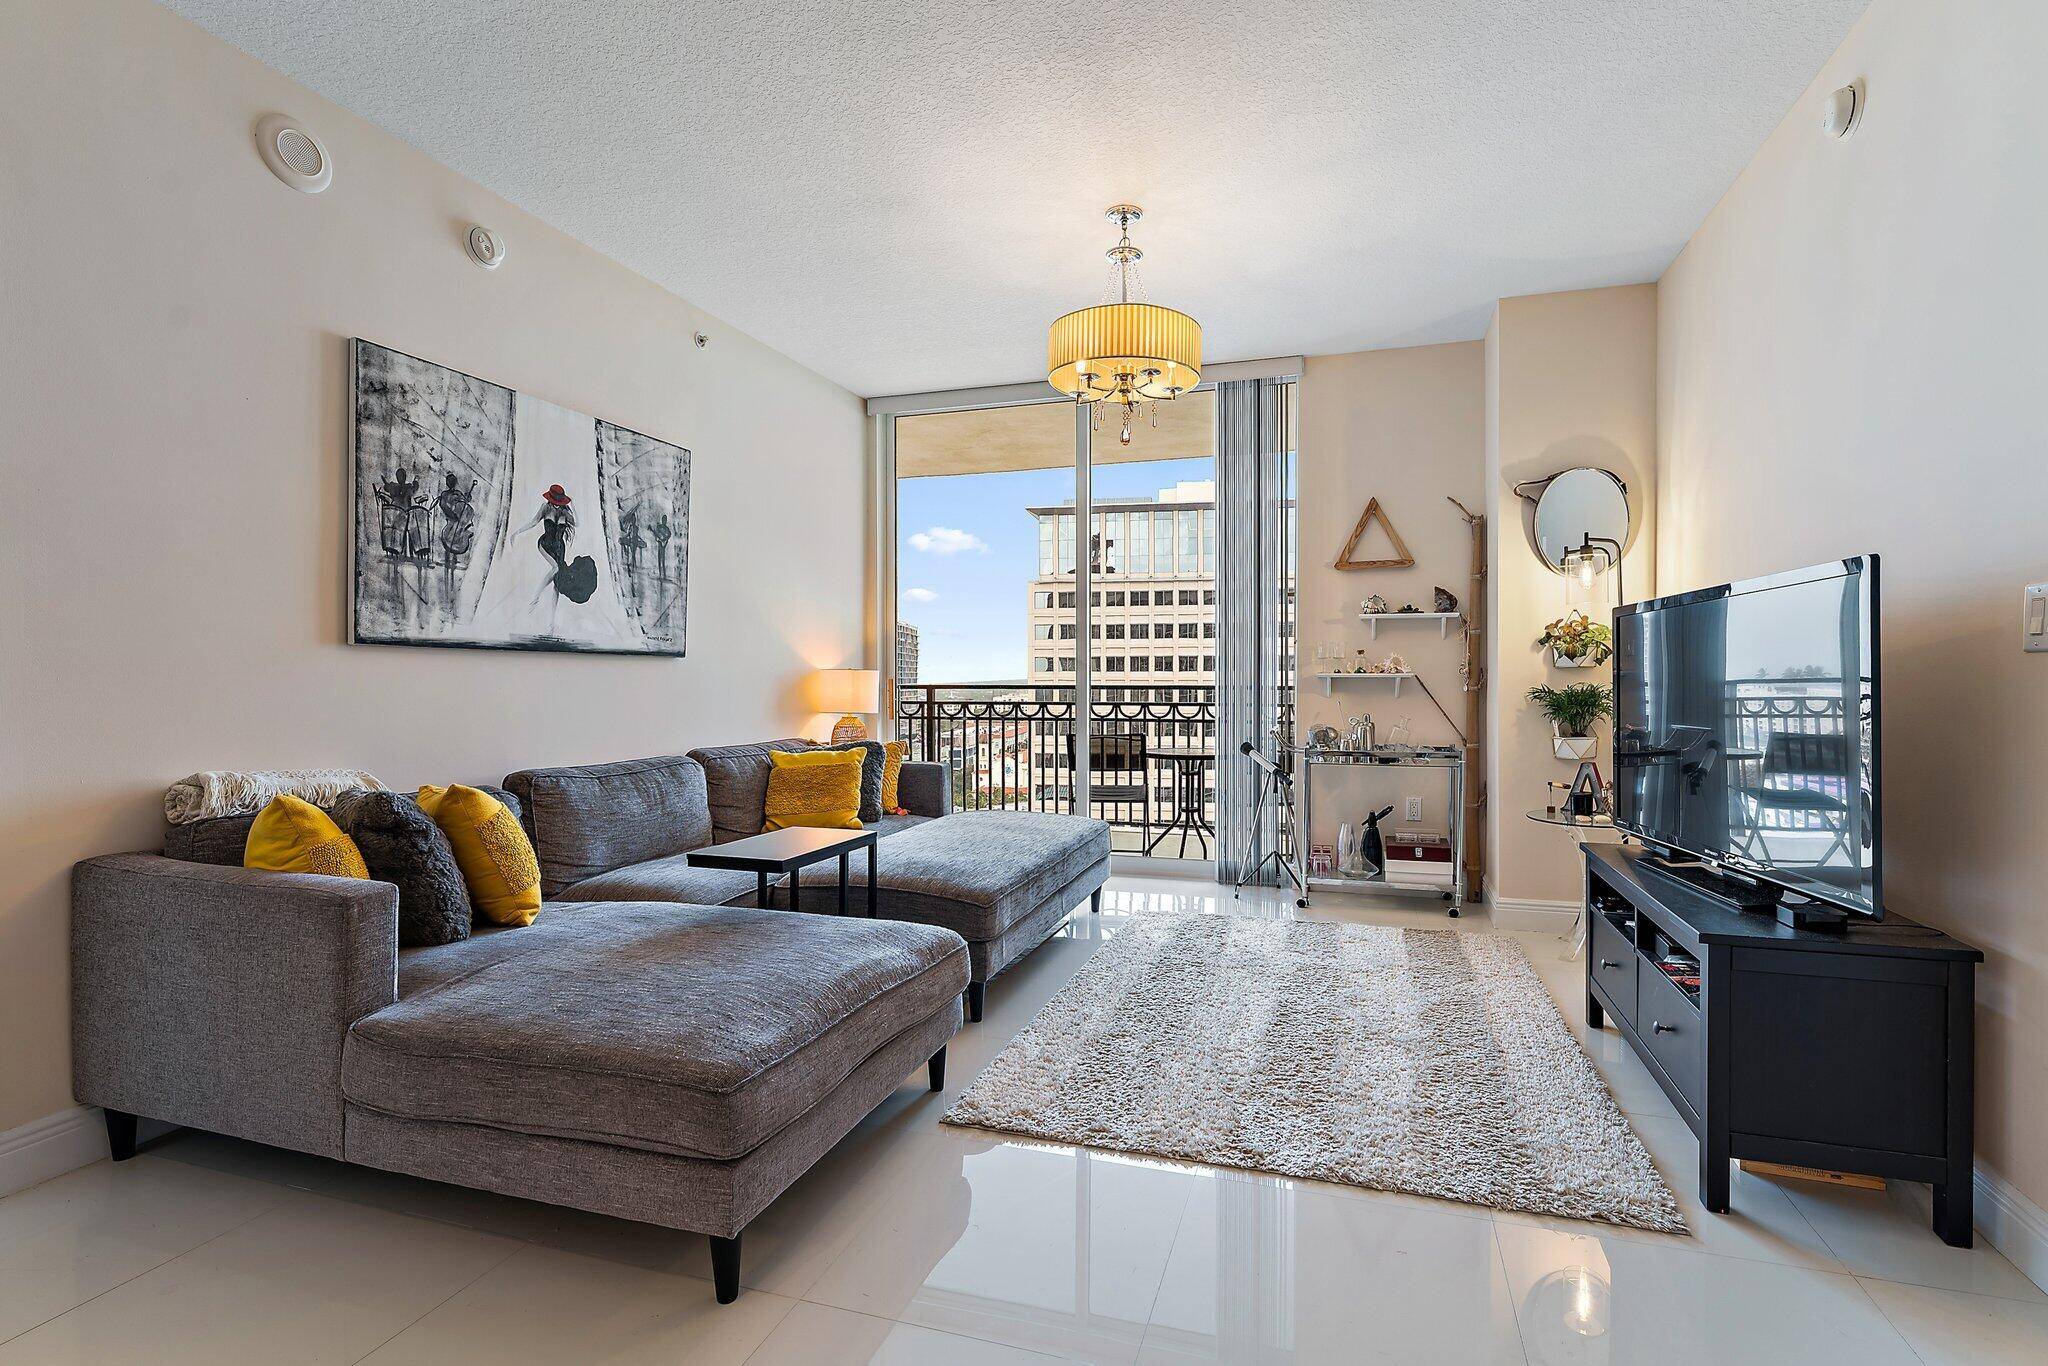 Experience captivating city and slight Intracoastal views from this stunning 2BD 2BA condo.